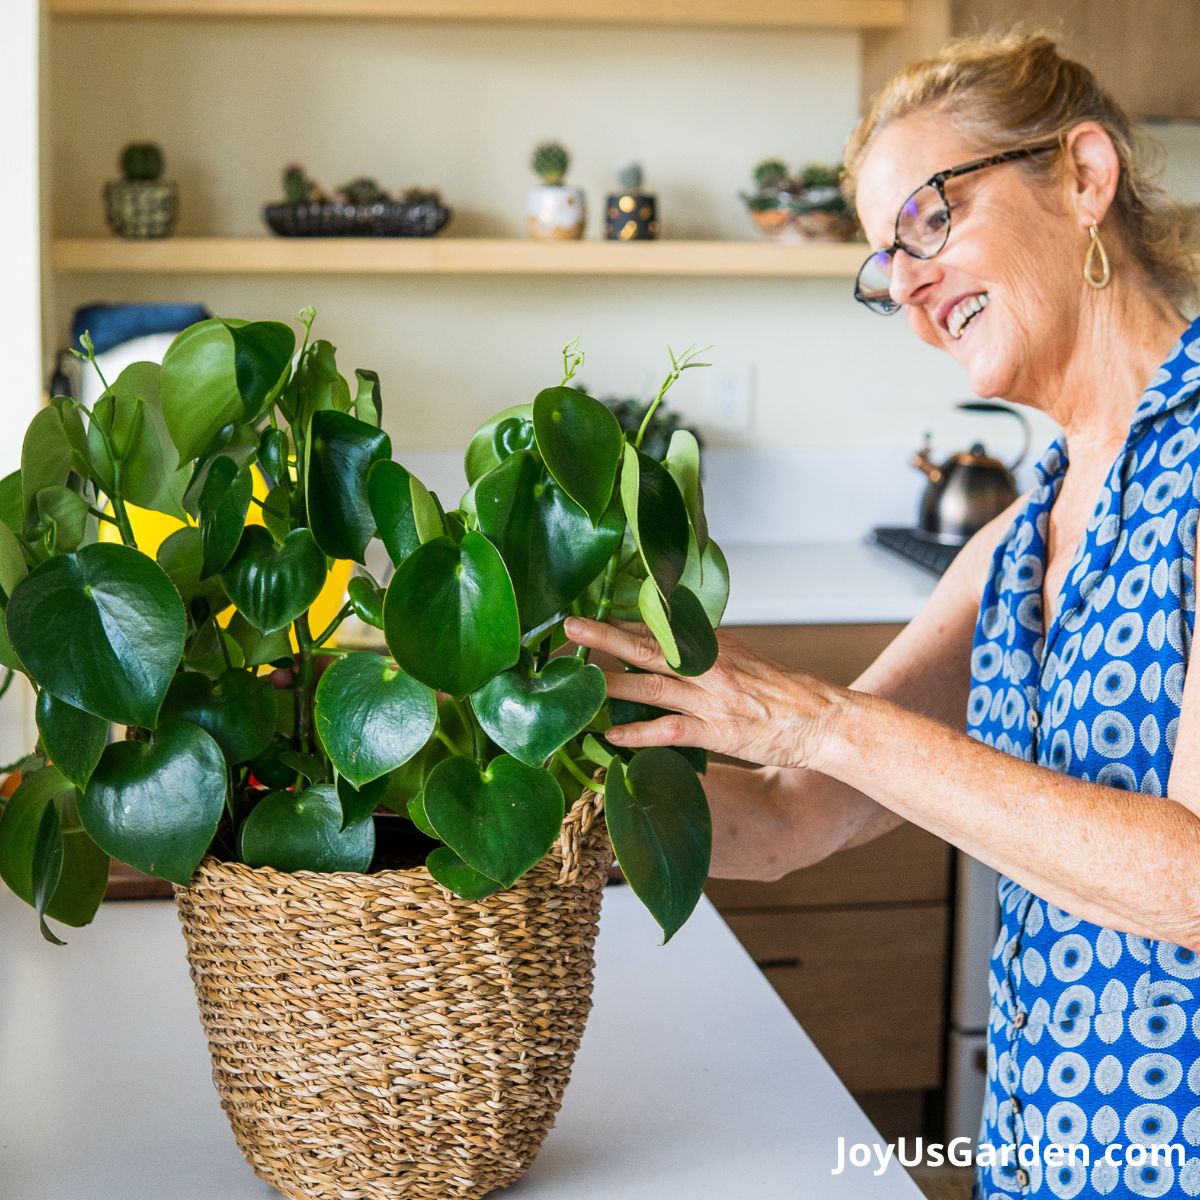 nell foster in blue top looking at a raindrop peperomia in plant basket on her kitchen counter